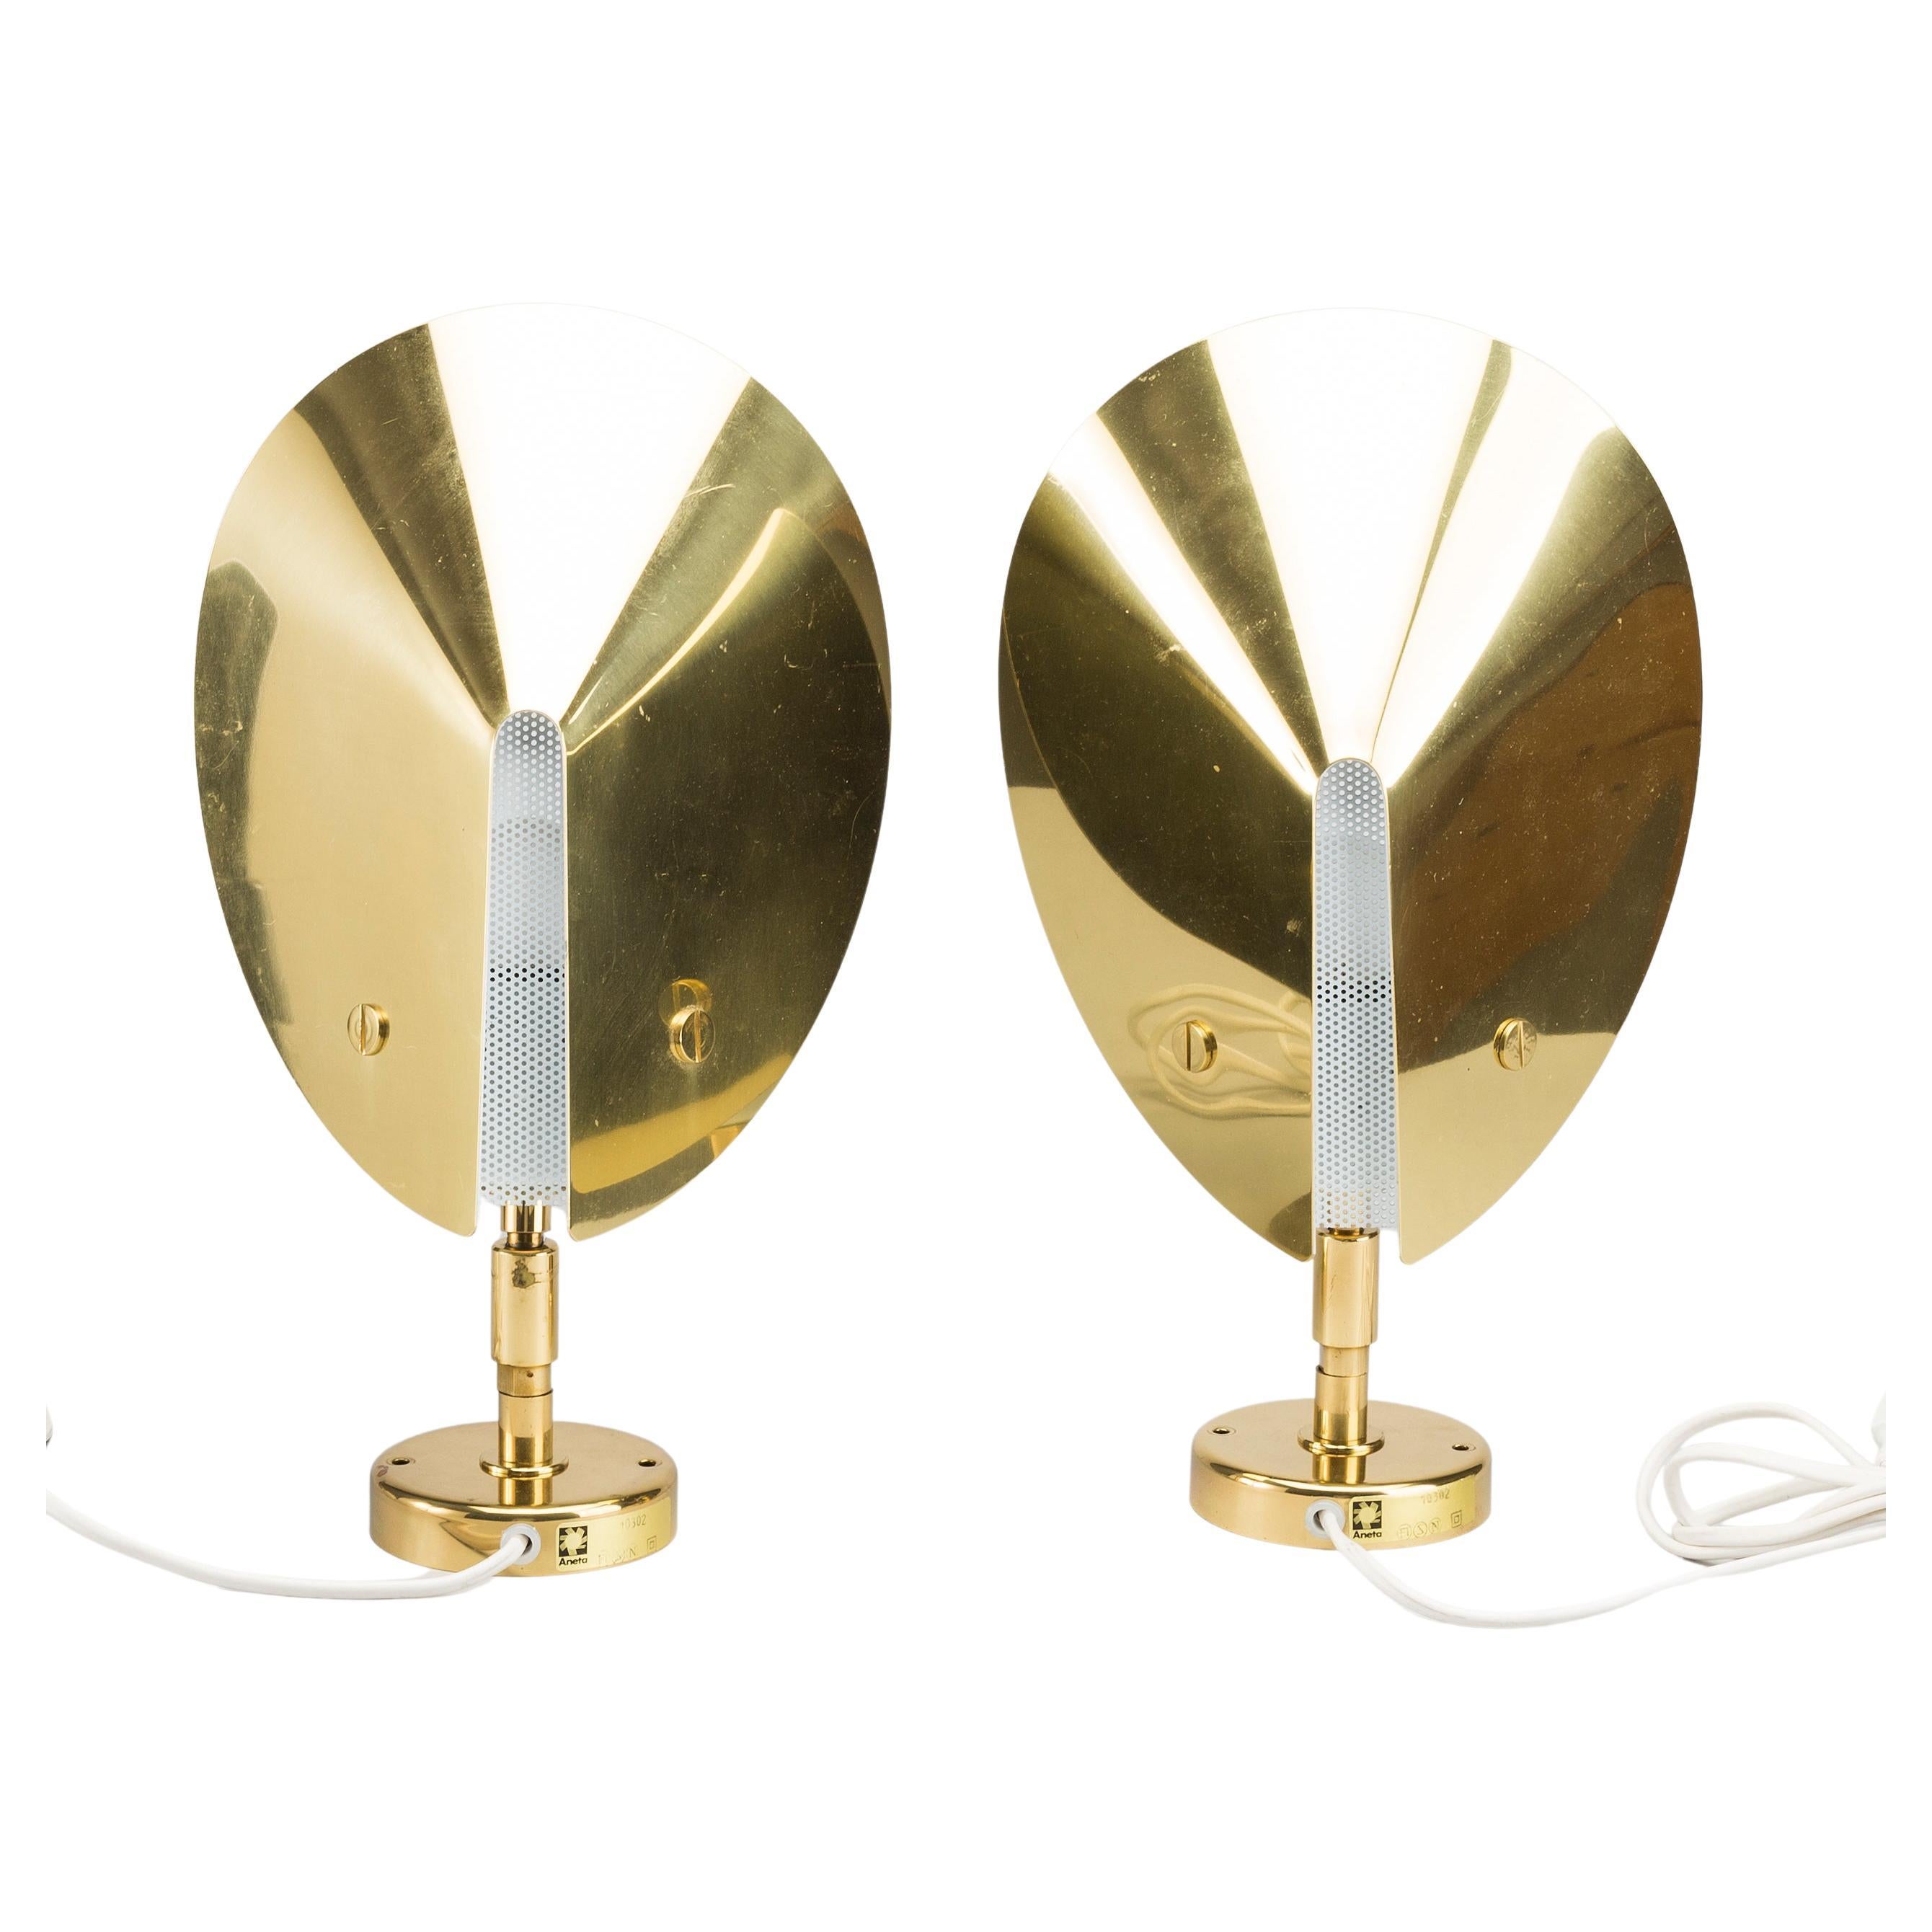 Pair of conical brass wall lights by Aneta, Sweden 1980. The sconces can be up lights or down lights and can adjust according to where you would like the light to project.
Accented by white perforated centre panels. Would look heavenly as bedroom